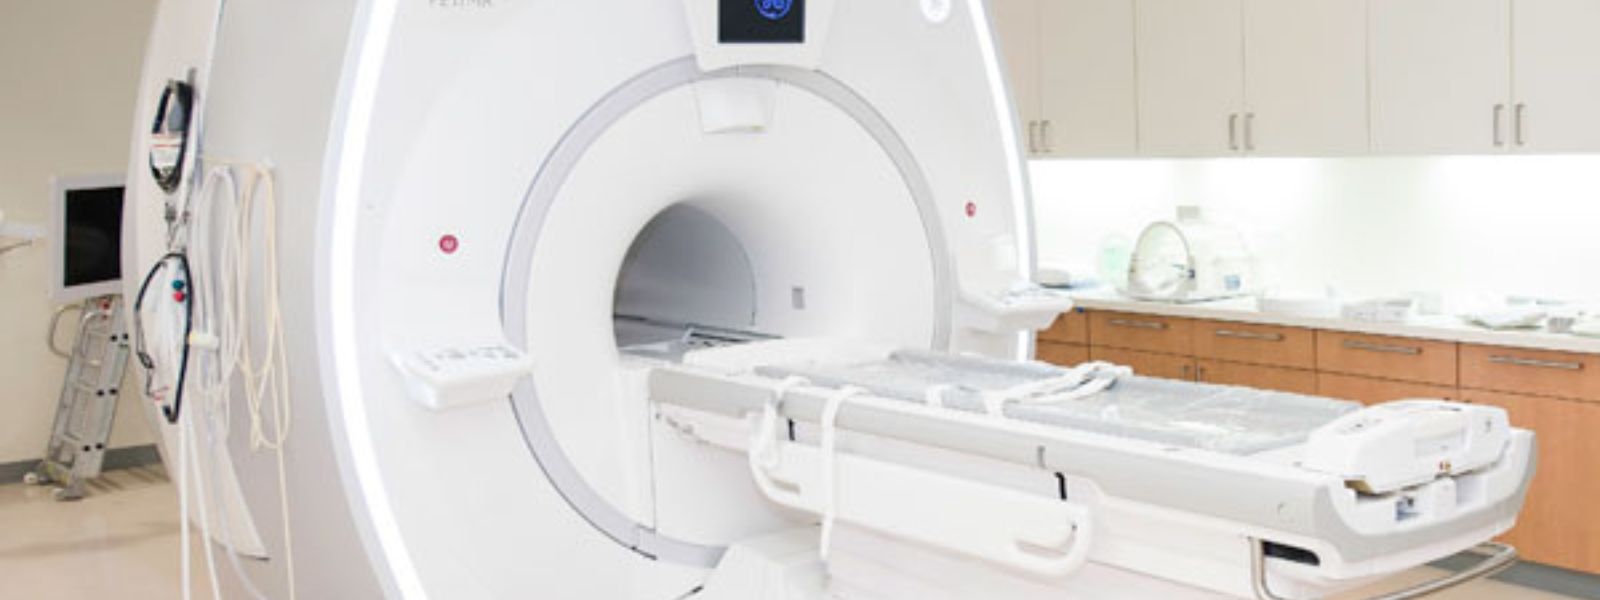 Only two MRI scanners operating at NHSL